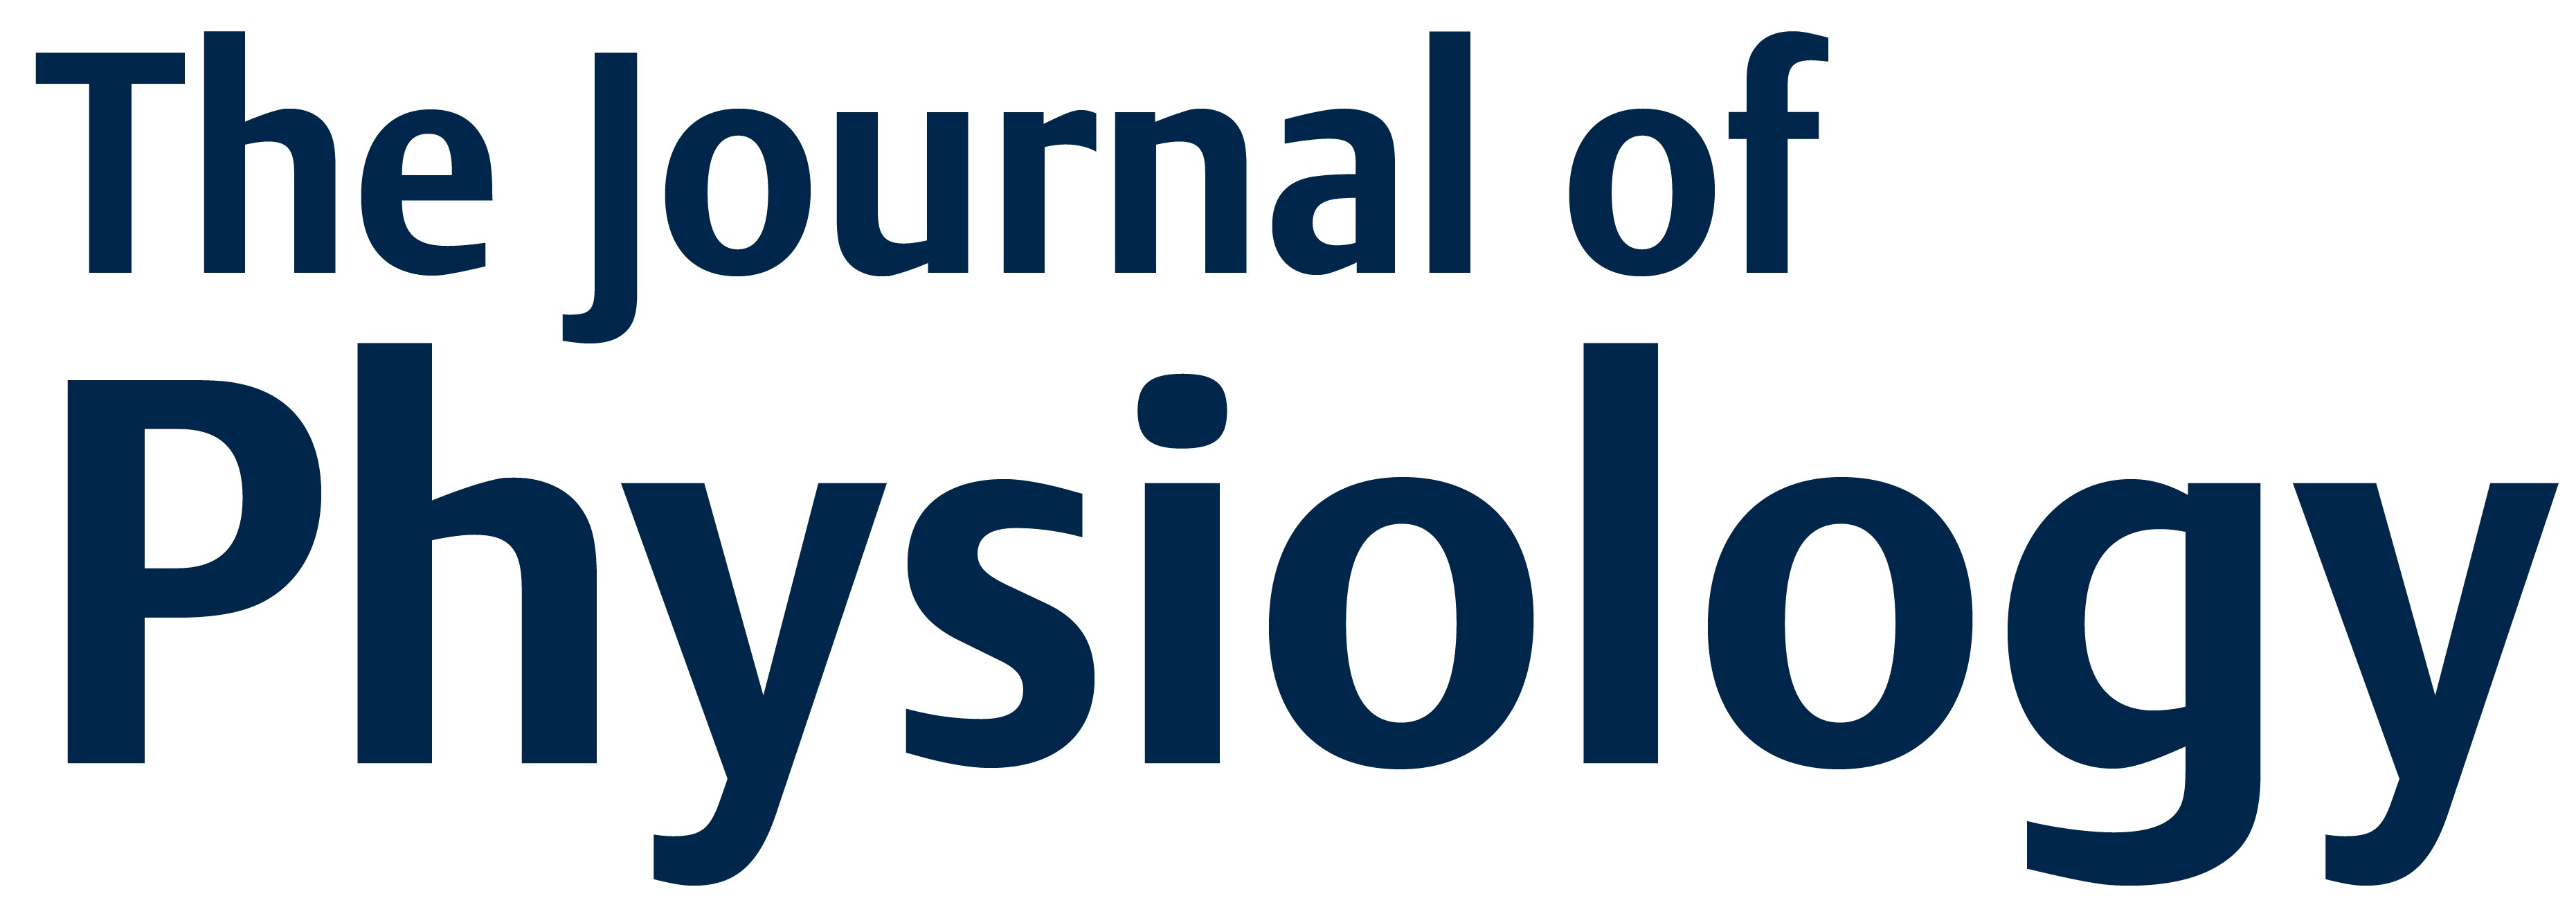 The Journal of Physiology tips for pregnant women- Sleep on your side, not your back in late pregnancy!